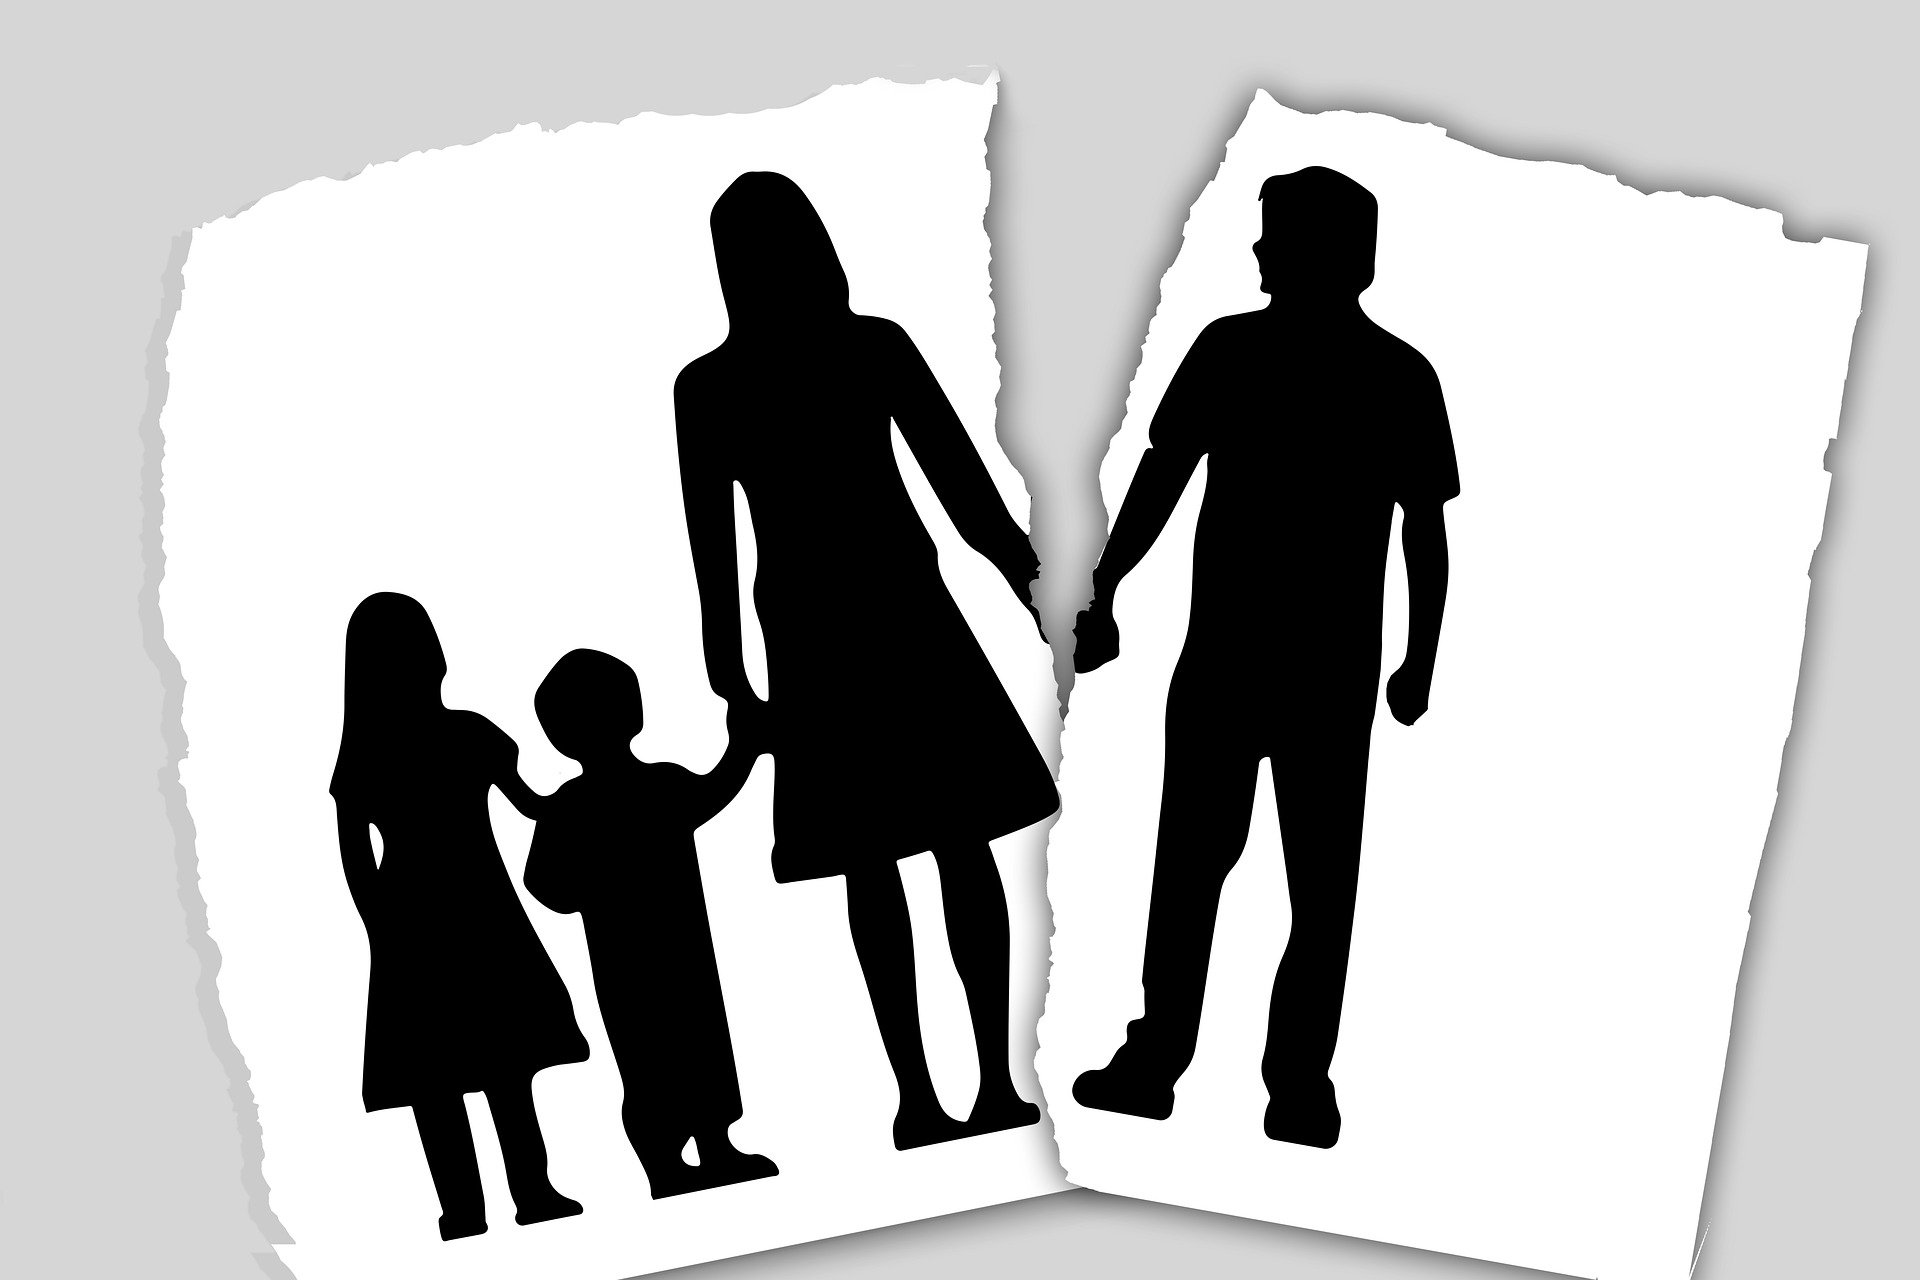 A clipart depicting family separation.